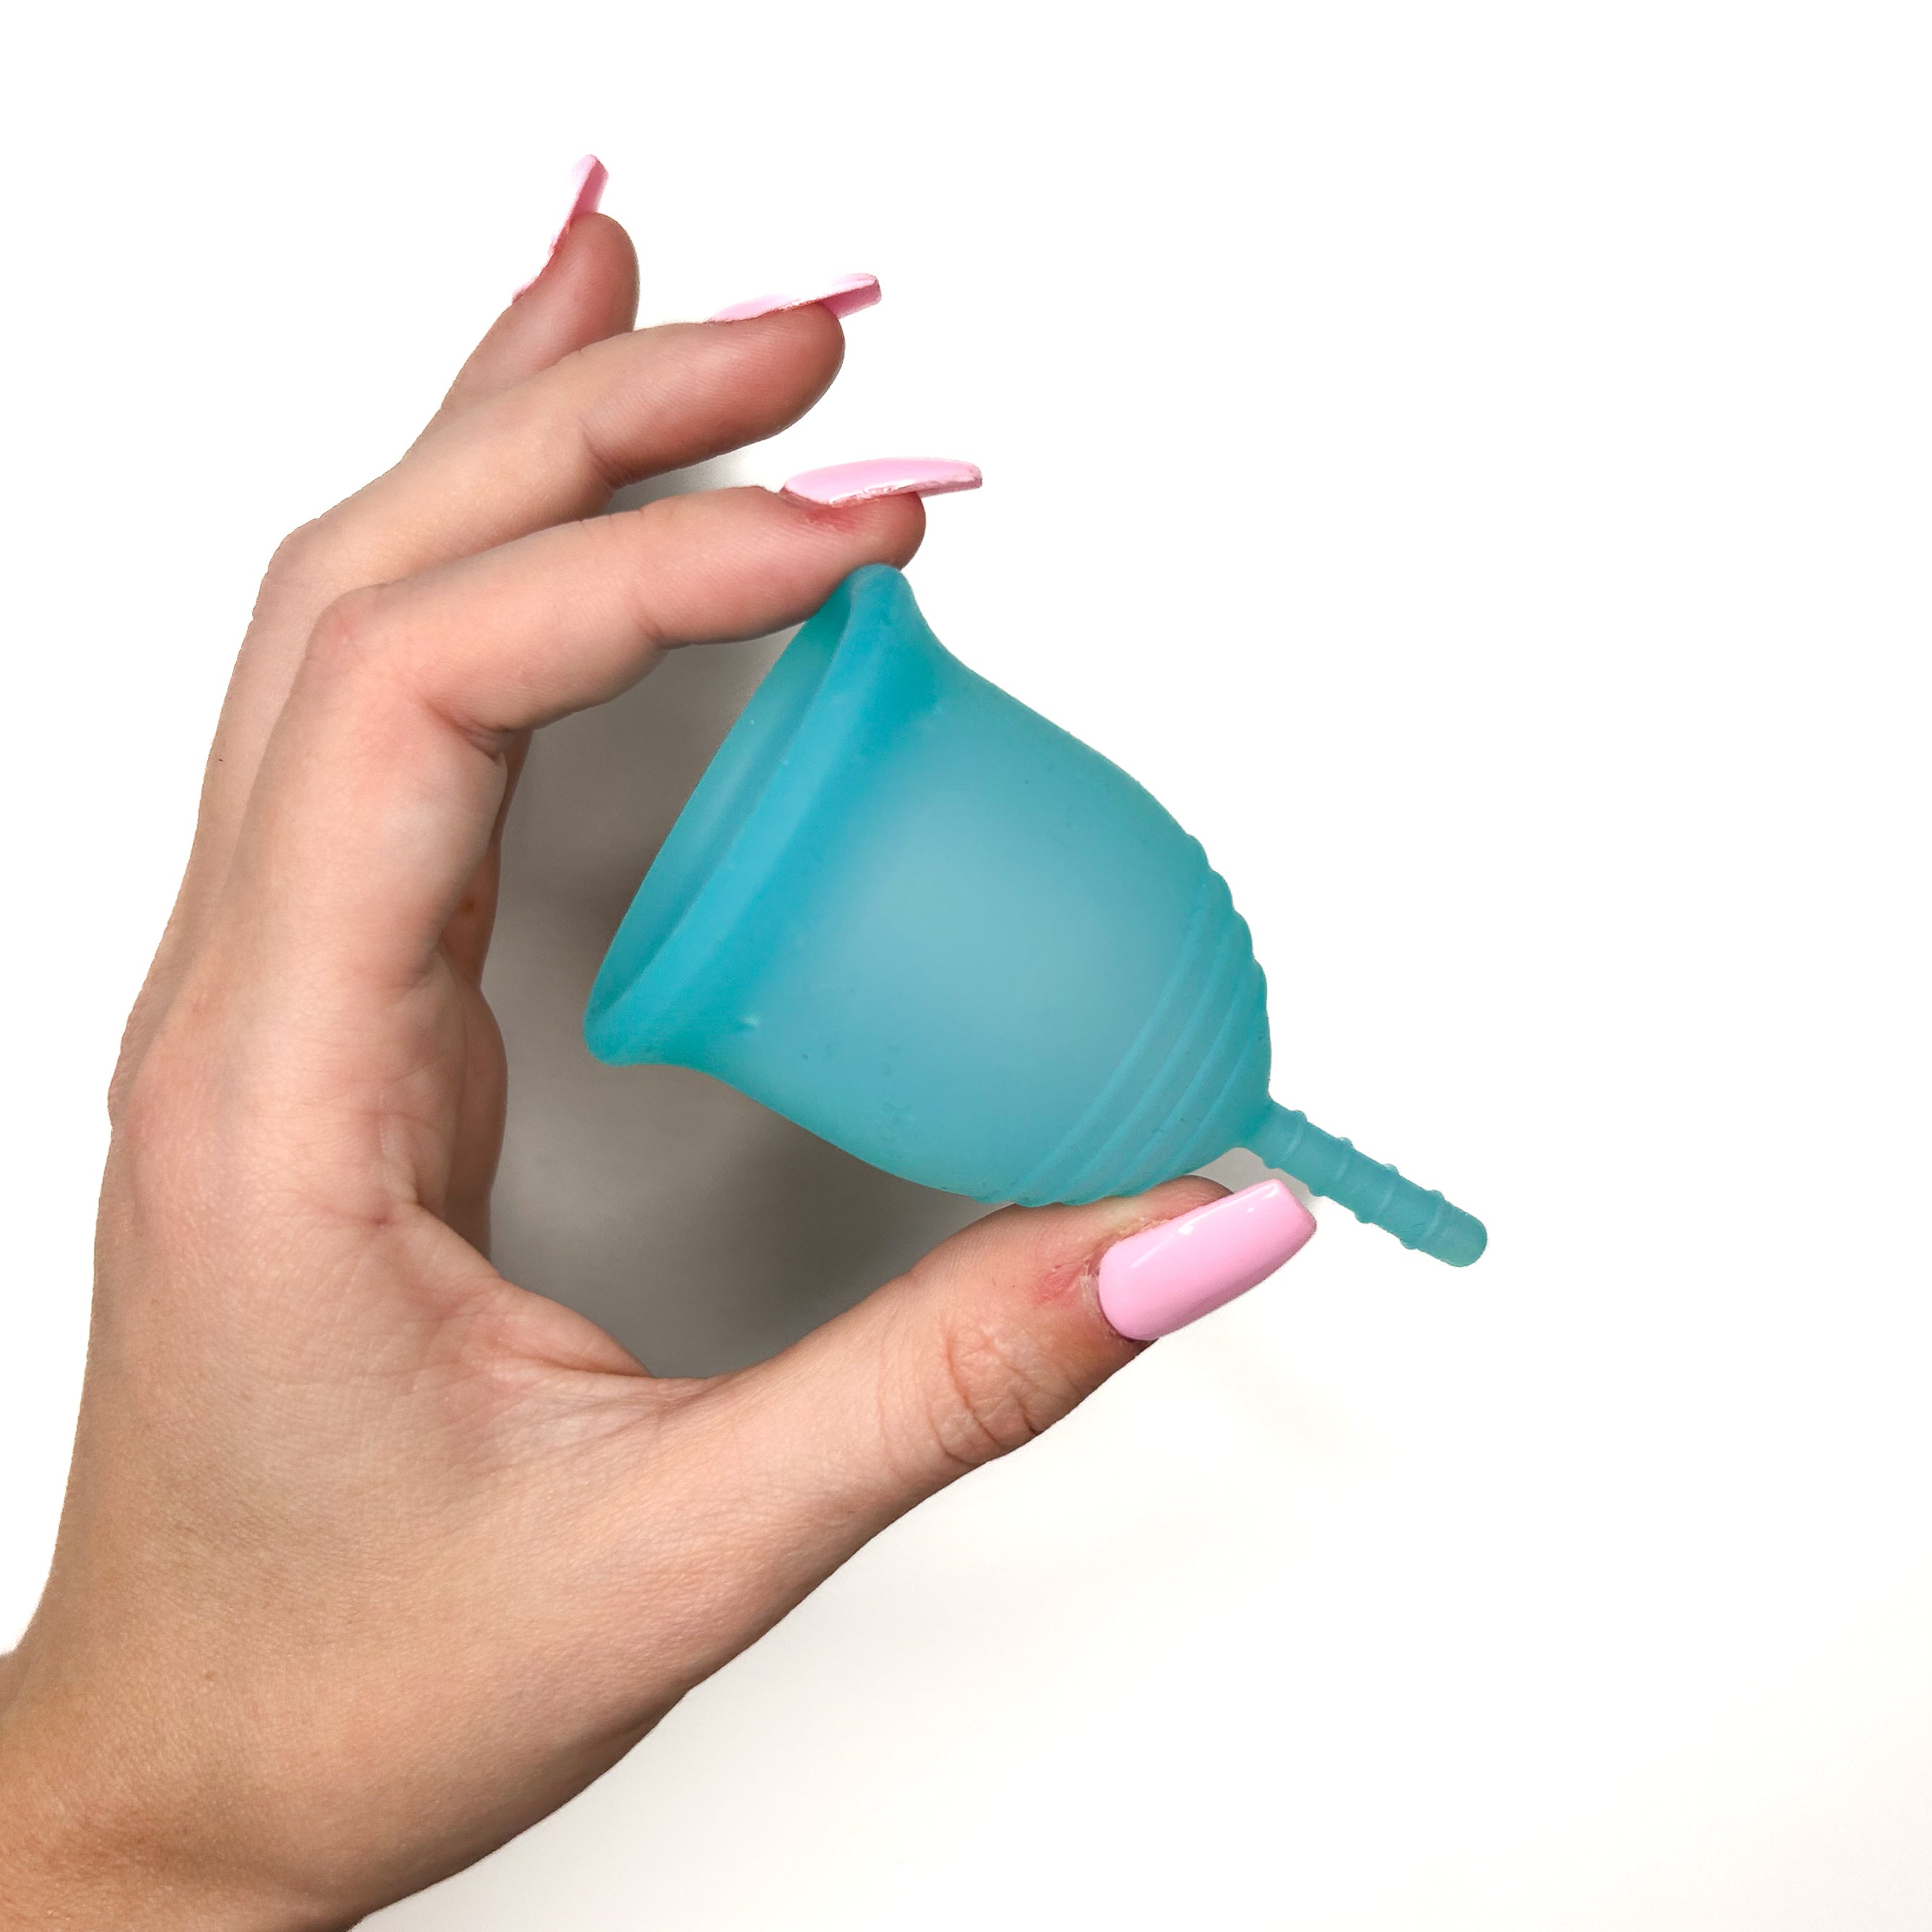 Female hand demonstrating a Menstrual Cup